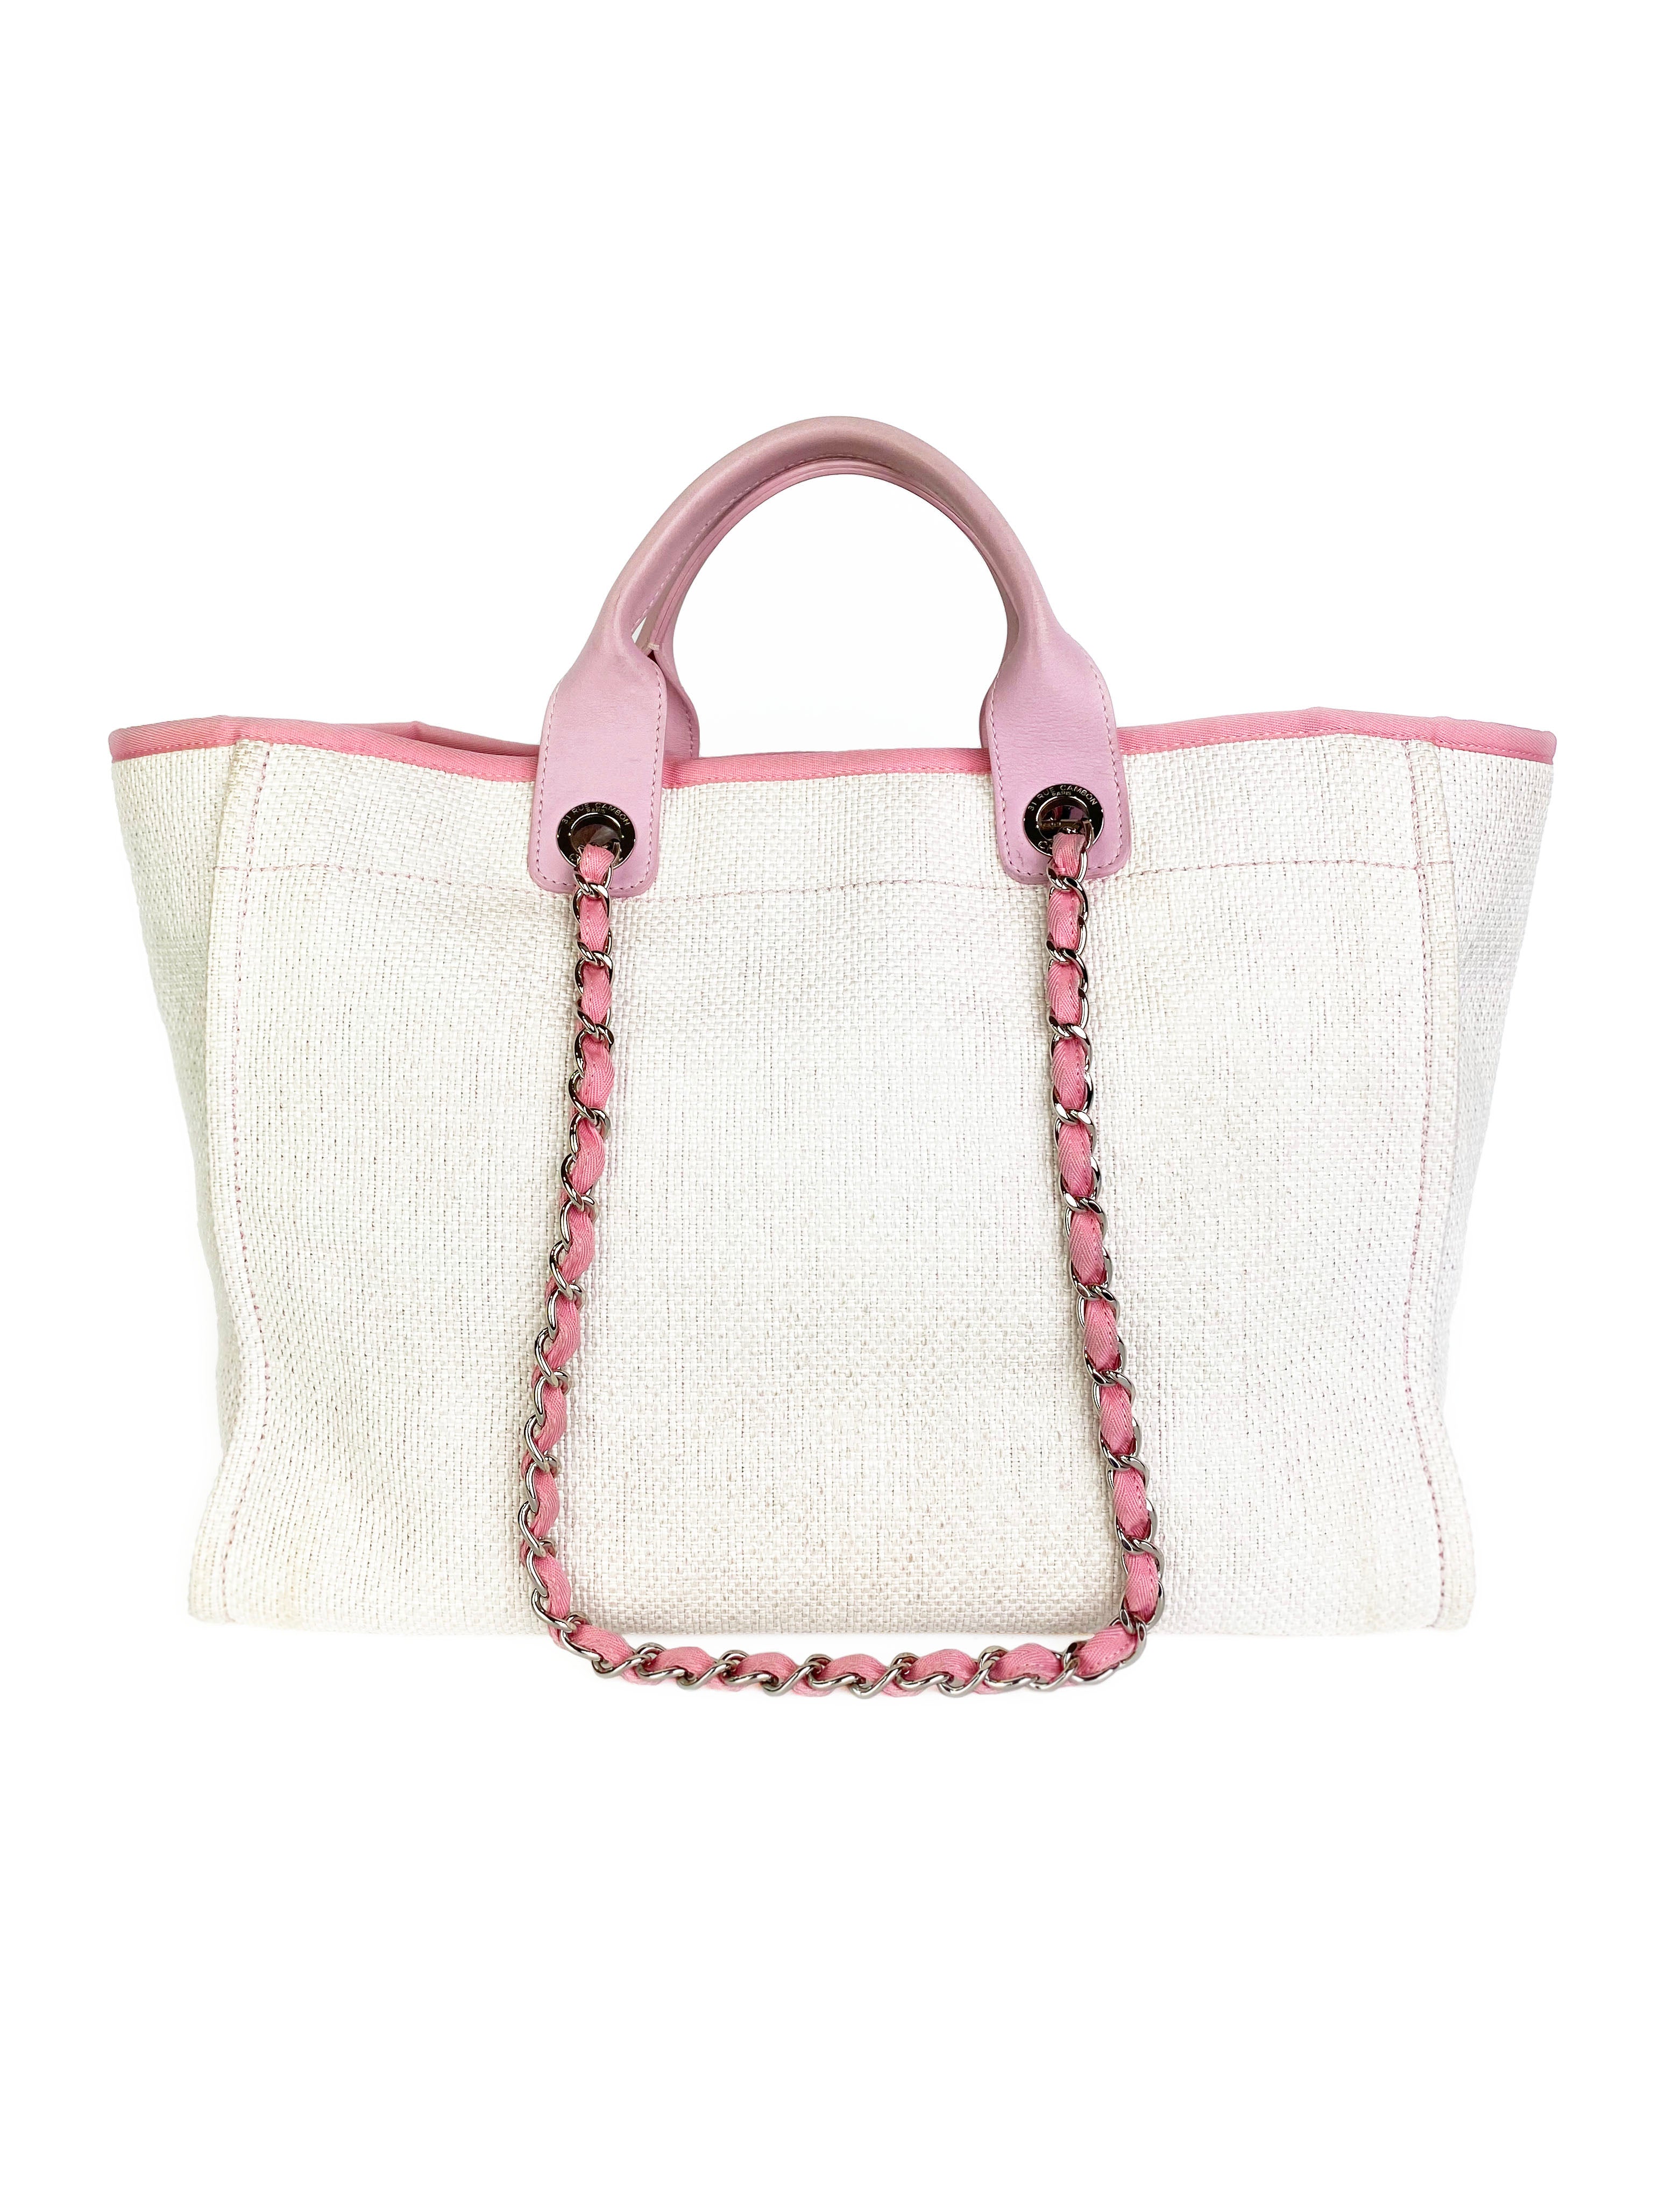 chanel-white-pink-deauville-tote-8_477aa2d2-6308-4e59-a003-4d7ae3112253.jpg